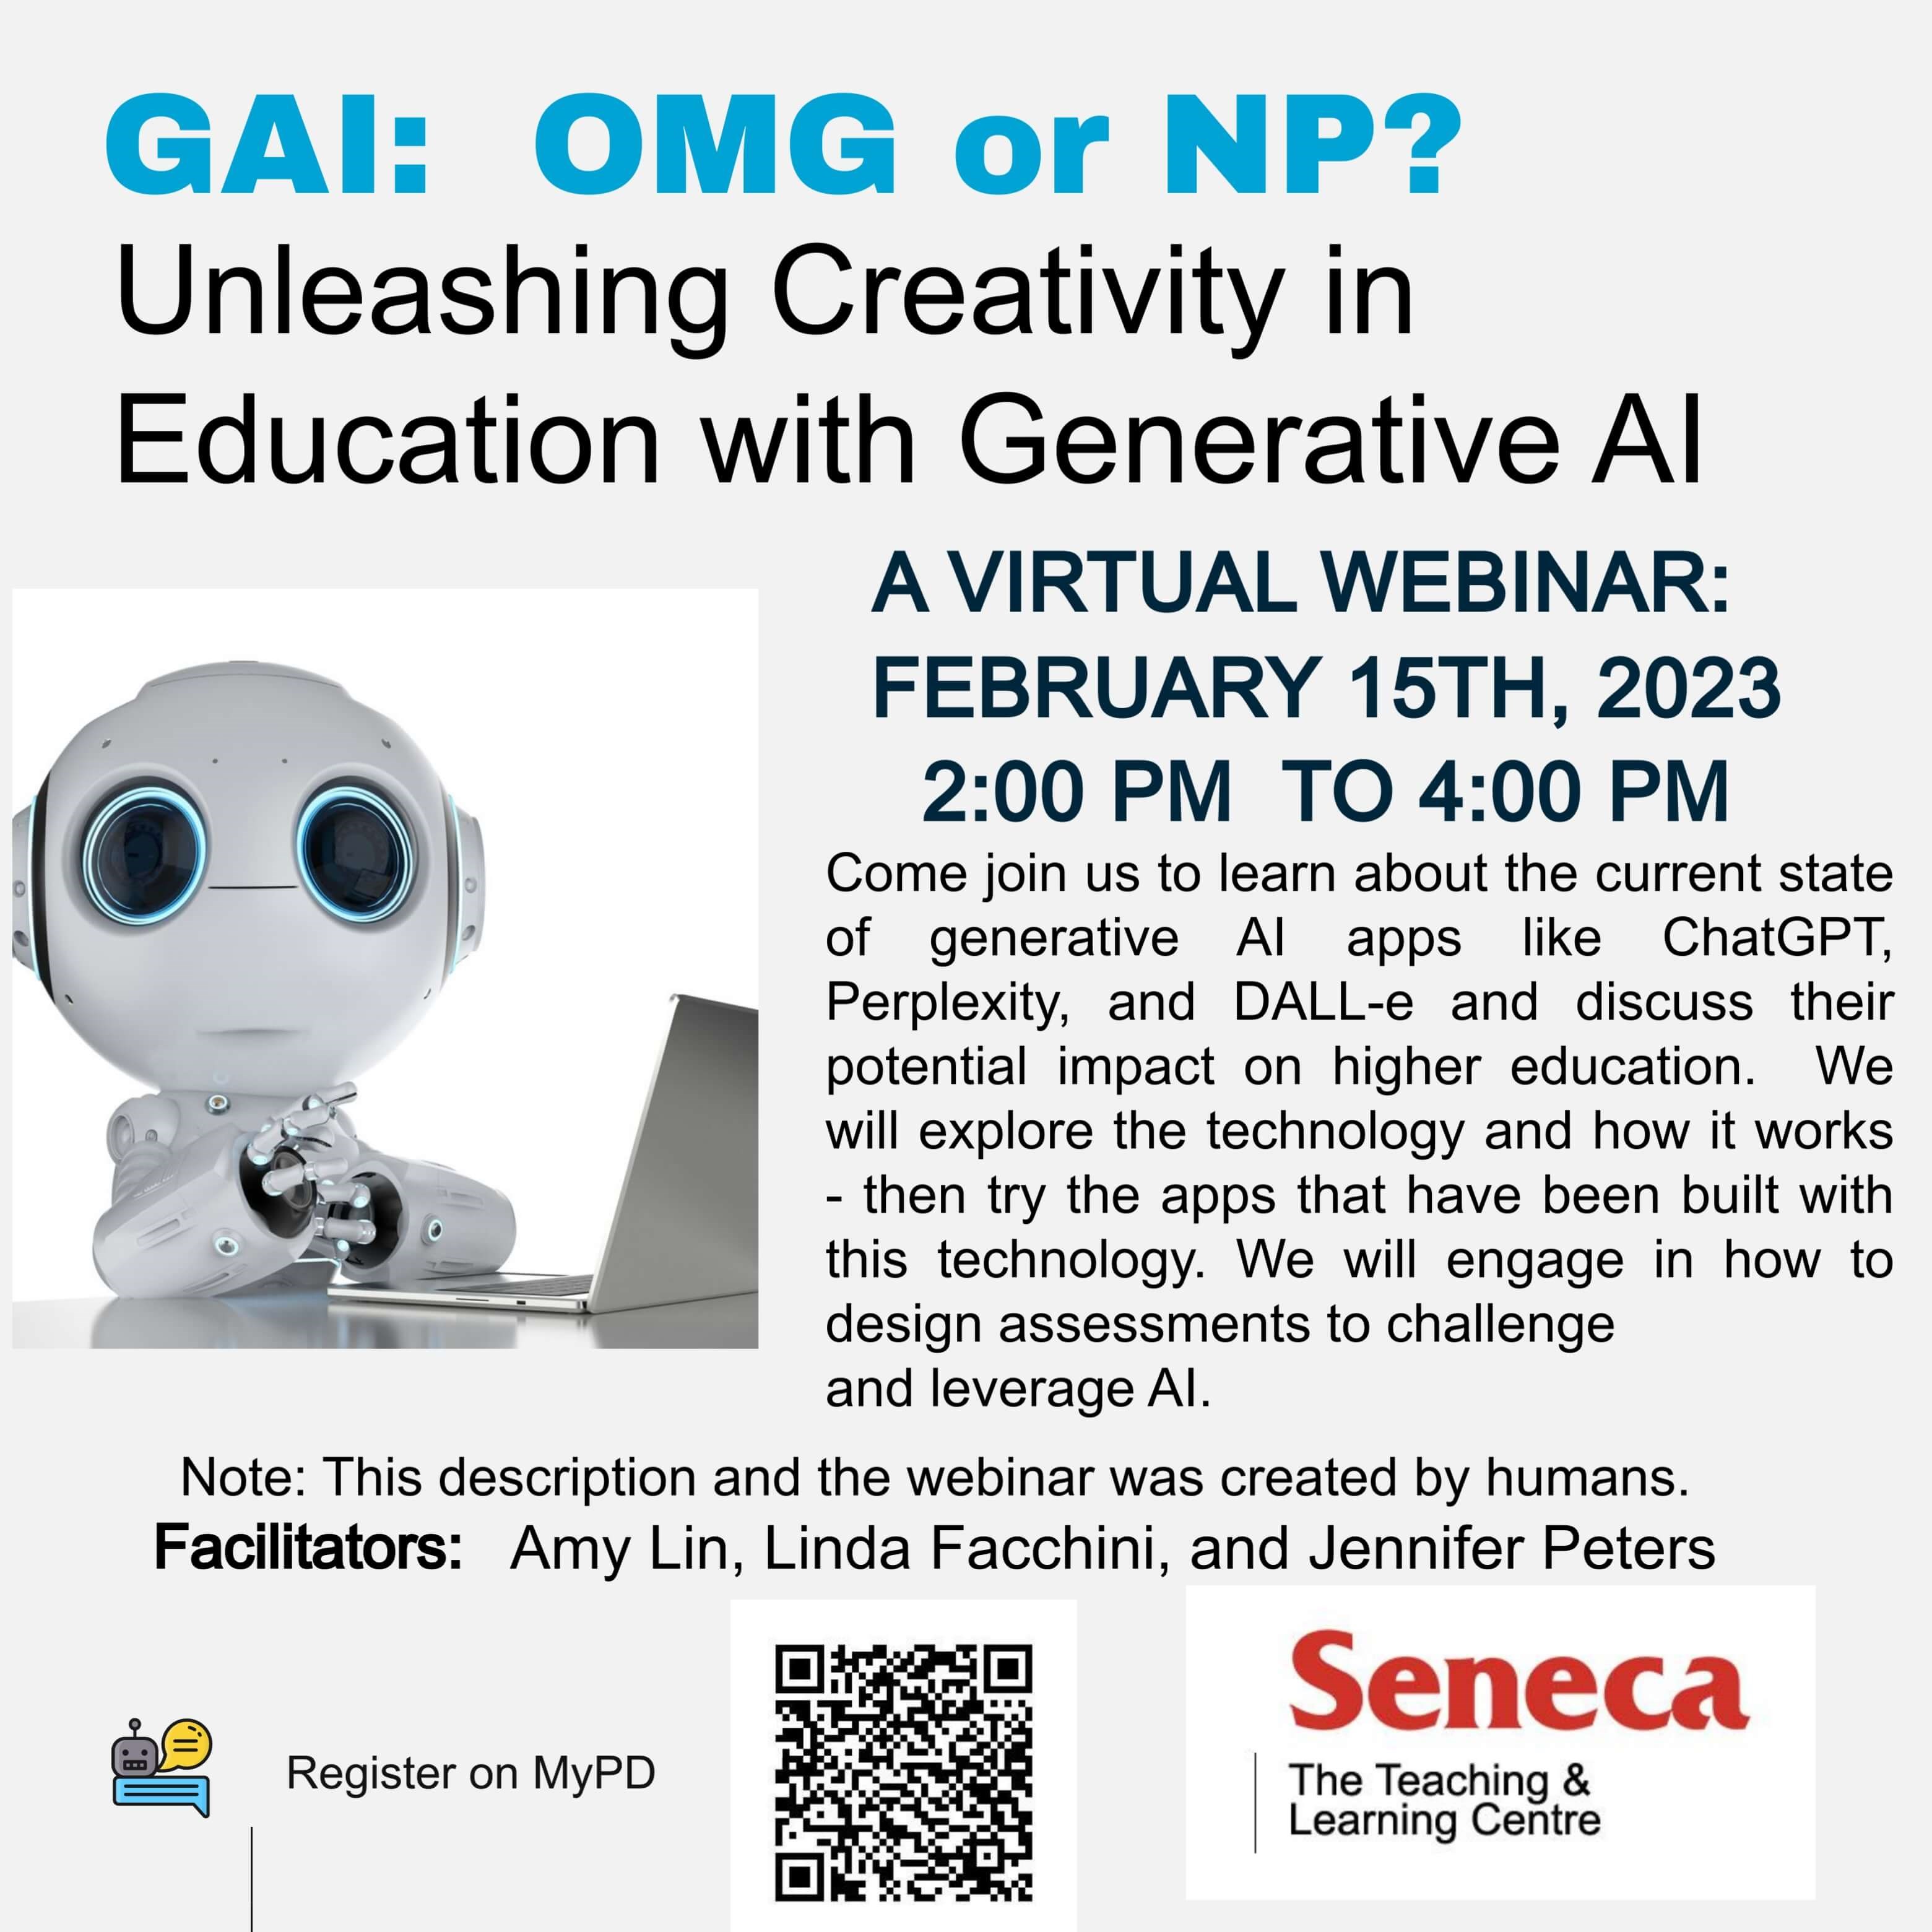 the flyer for the GAI: OMG or NP? webinar